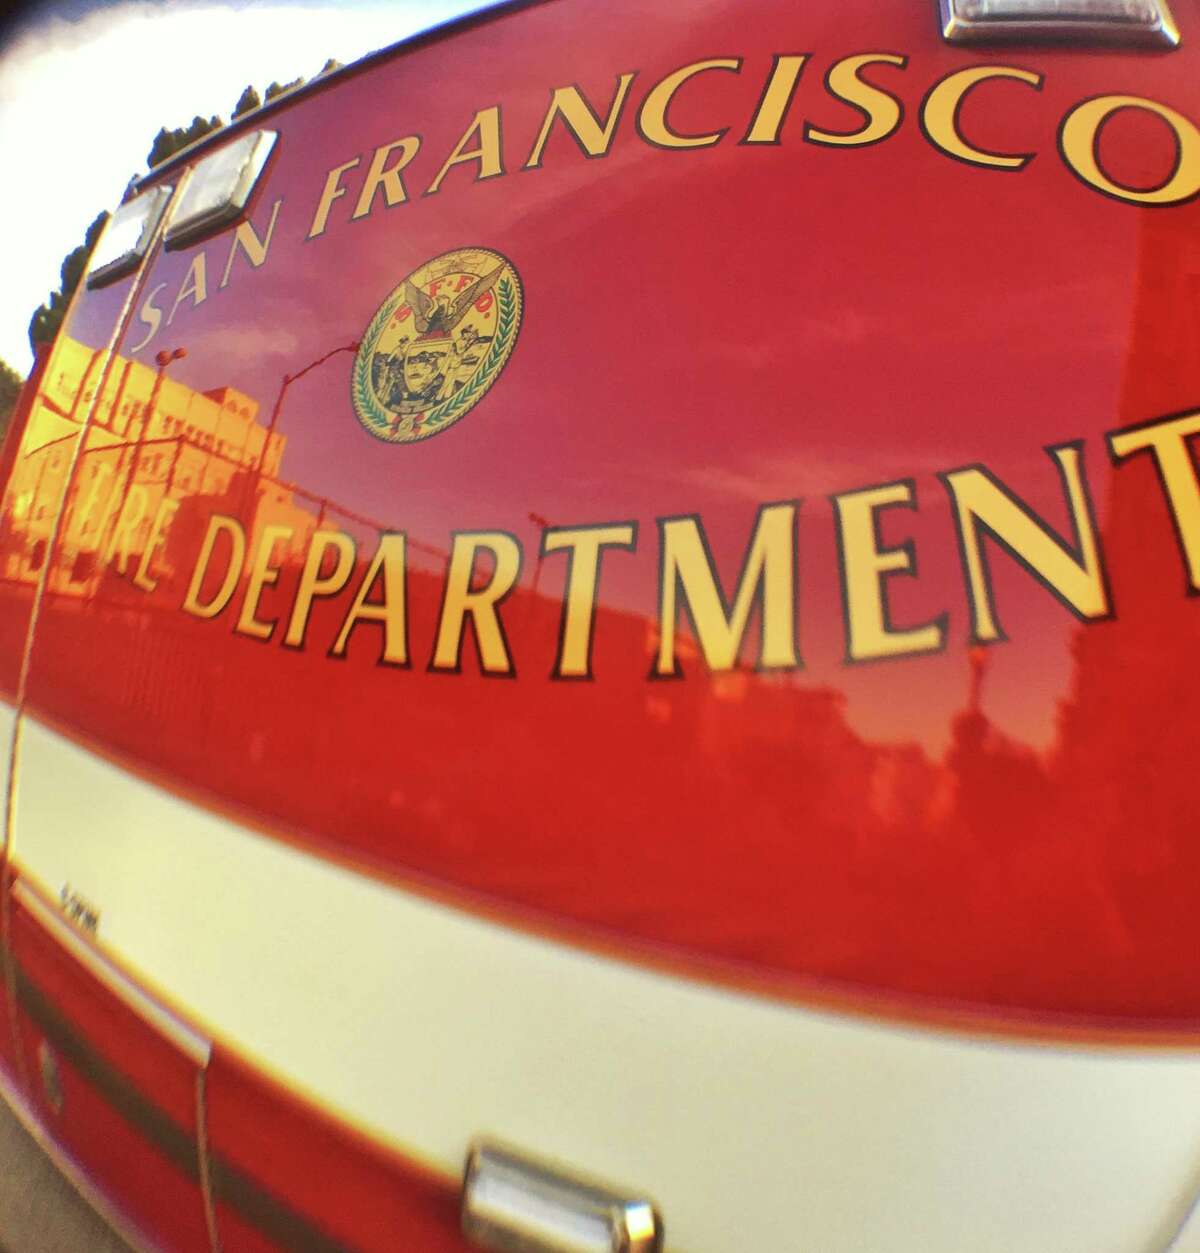 The San Francisco Fire Department advised people to avoid the area around the 1200 block of Van Dyke Avenue in San Francisco, which has been evacuated because of a large propane tank leak.